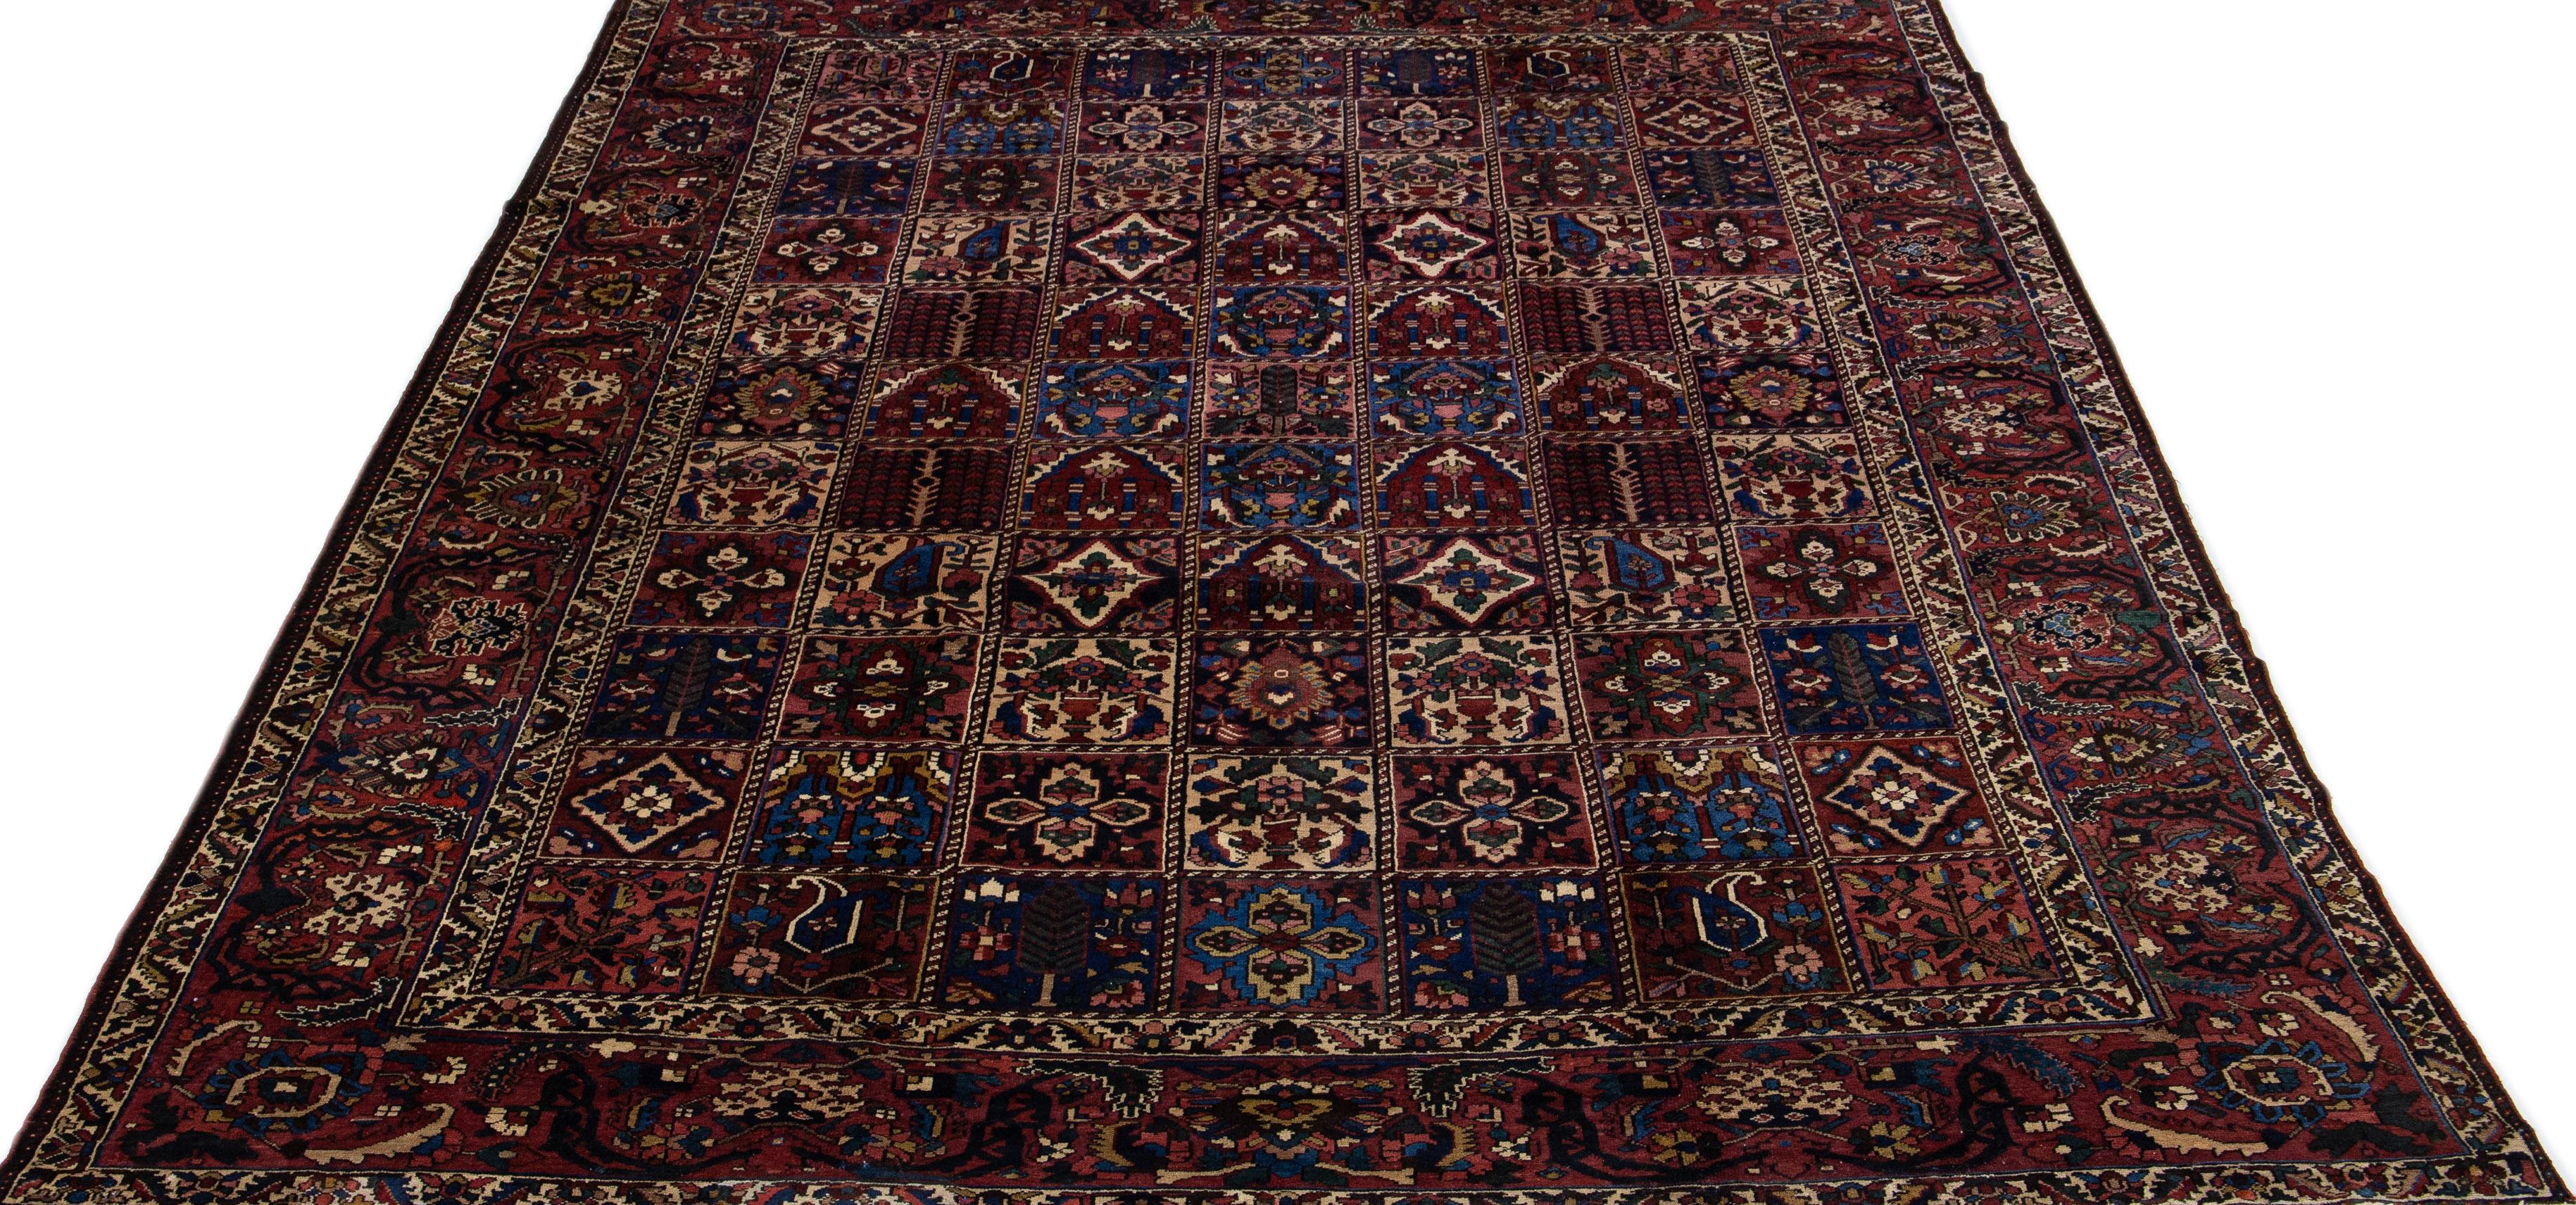 Beautiful Antique Bakhtiari hand-knotted wool rug with a burgundy color field. This Persian piece has an all-over classic floral multicolor design.

This rug measures 10'4